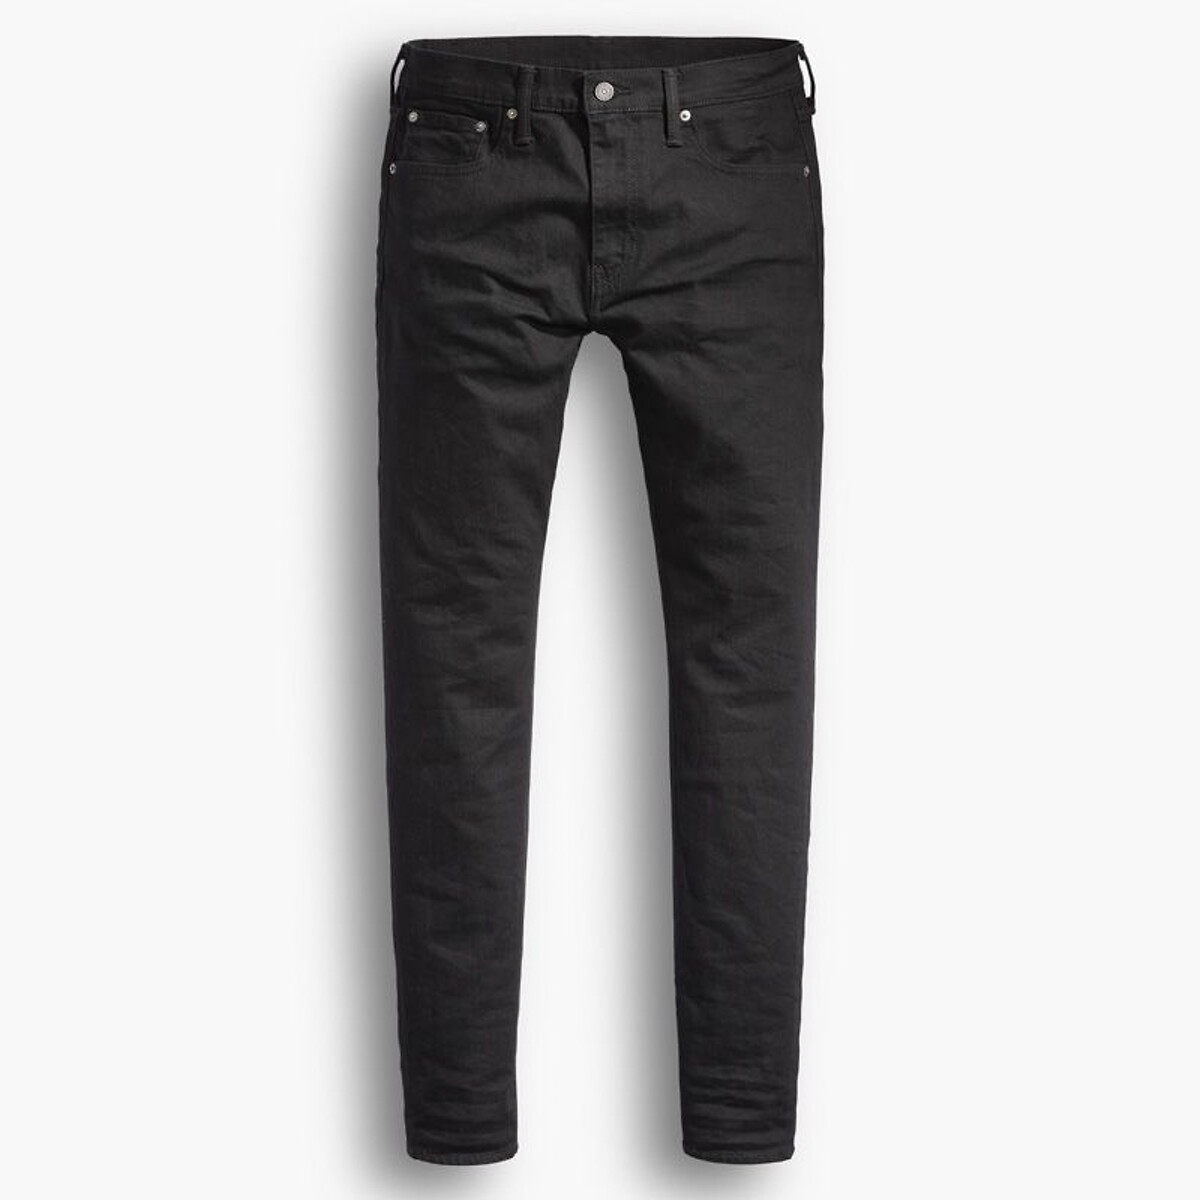 Image of 512? Slim Taper Jeans, Mid Rise